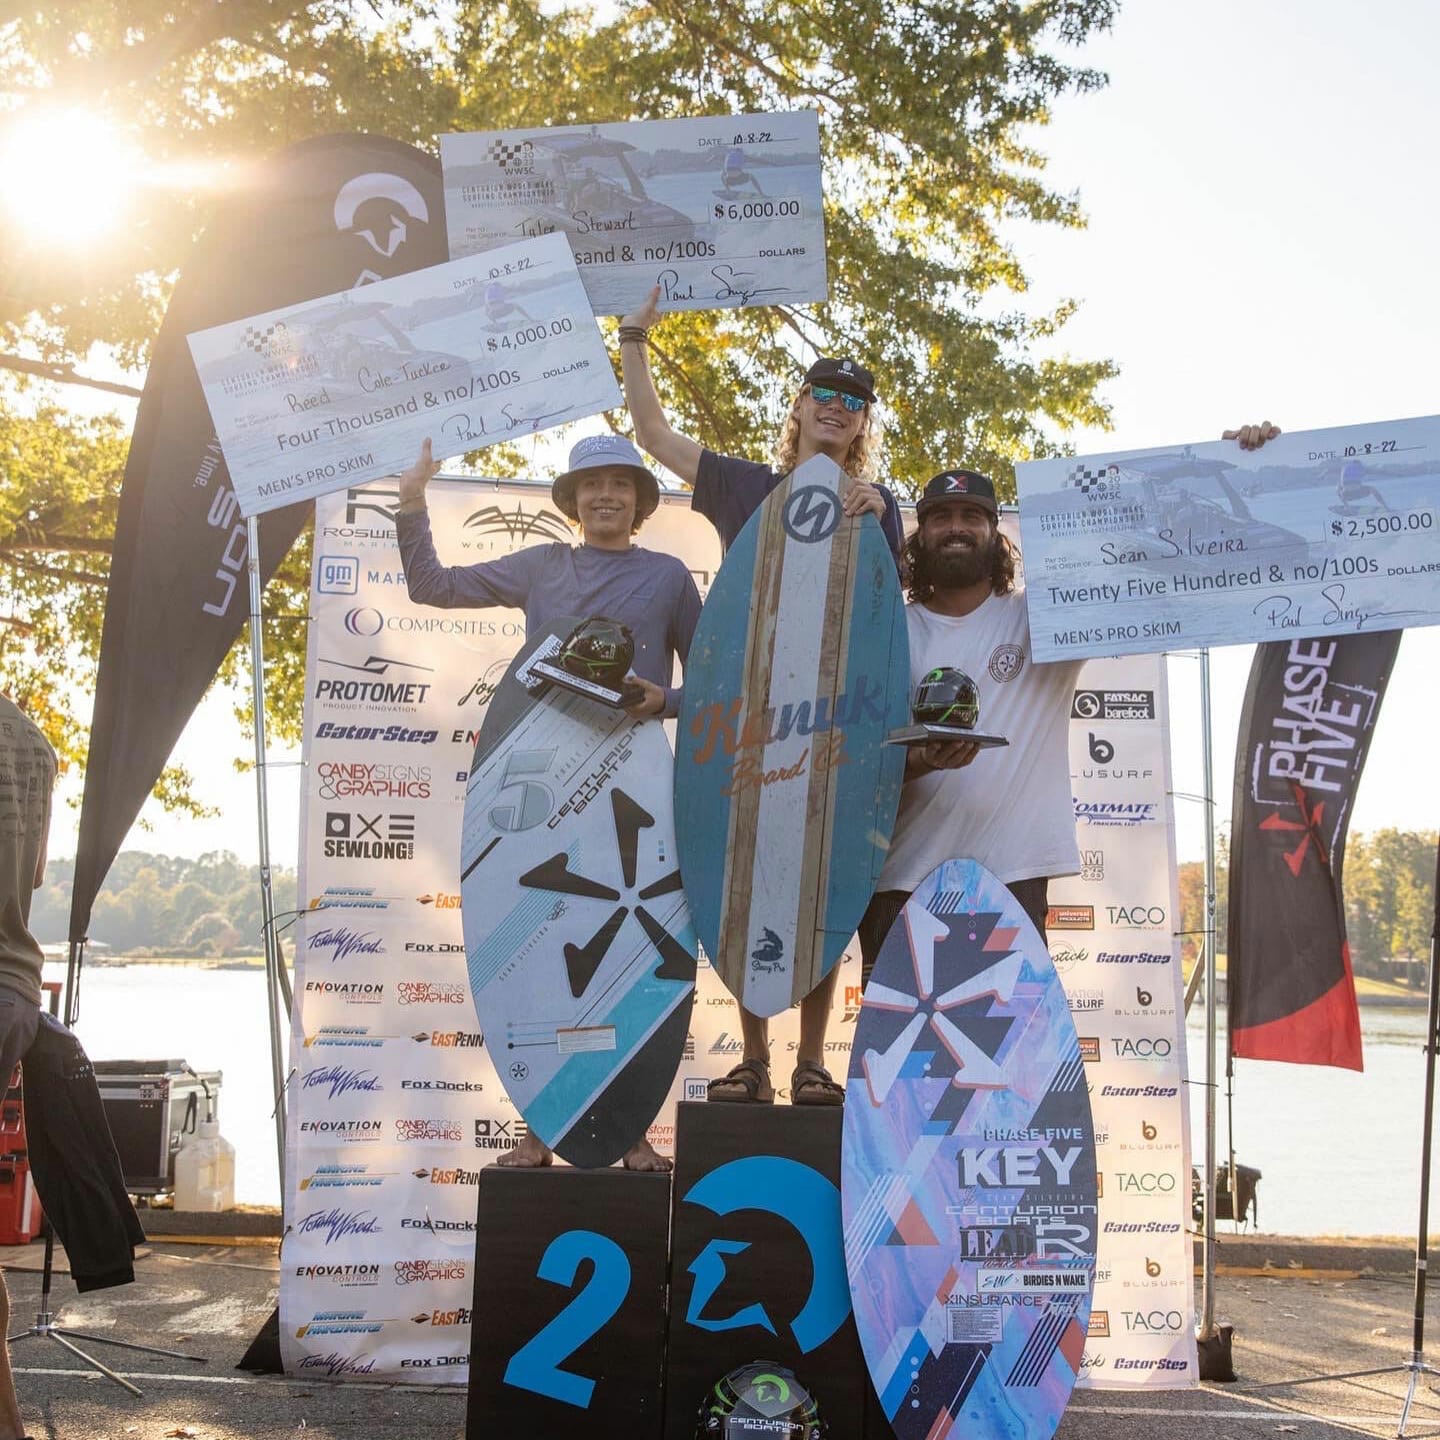 A group of people standing on top of a podium with surfboards and wakesurf boards.